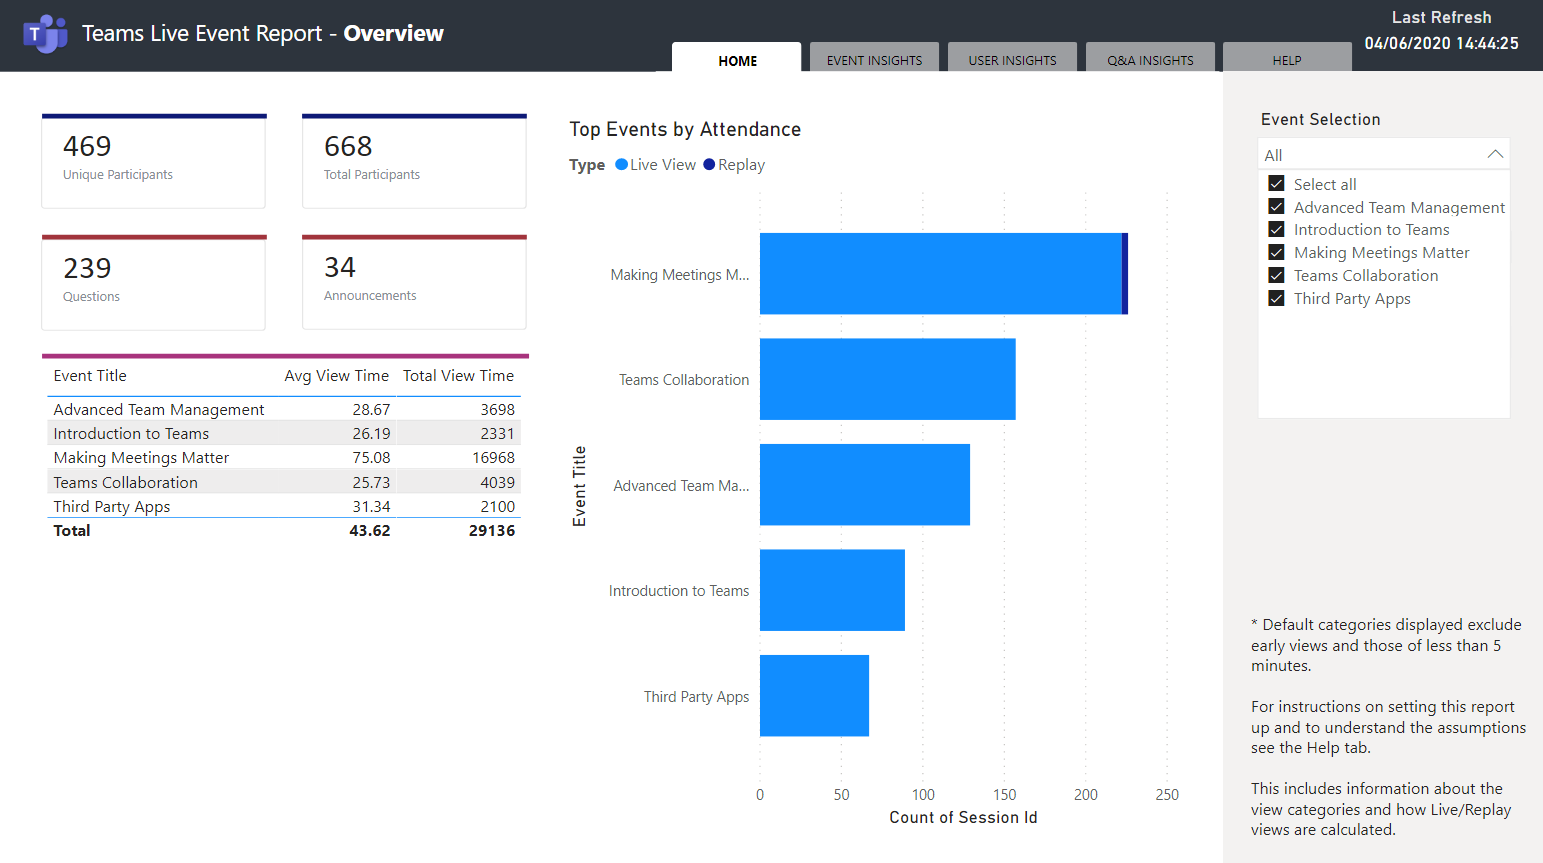 Overview page of BI dashboard showing performance by event